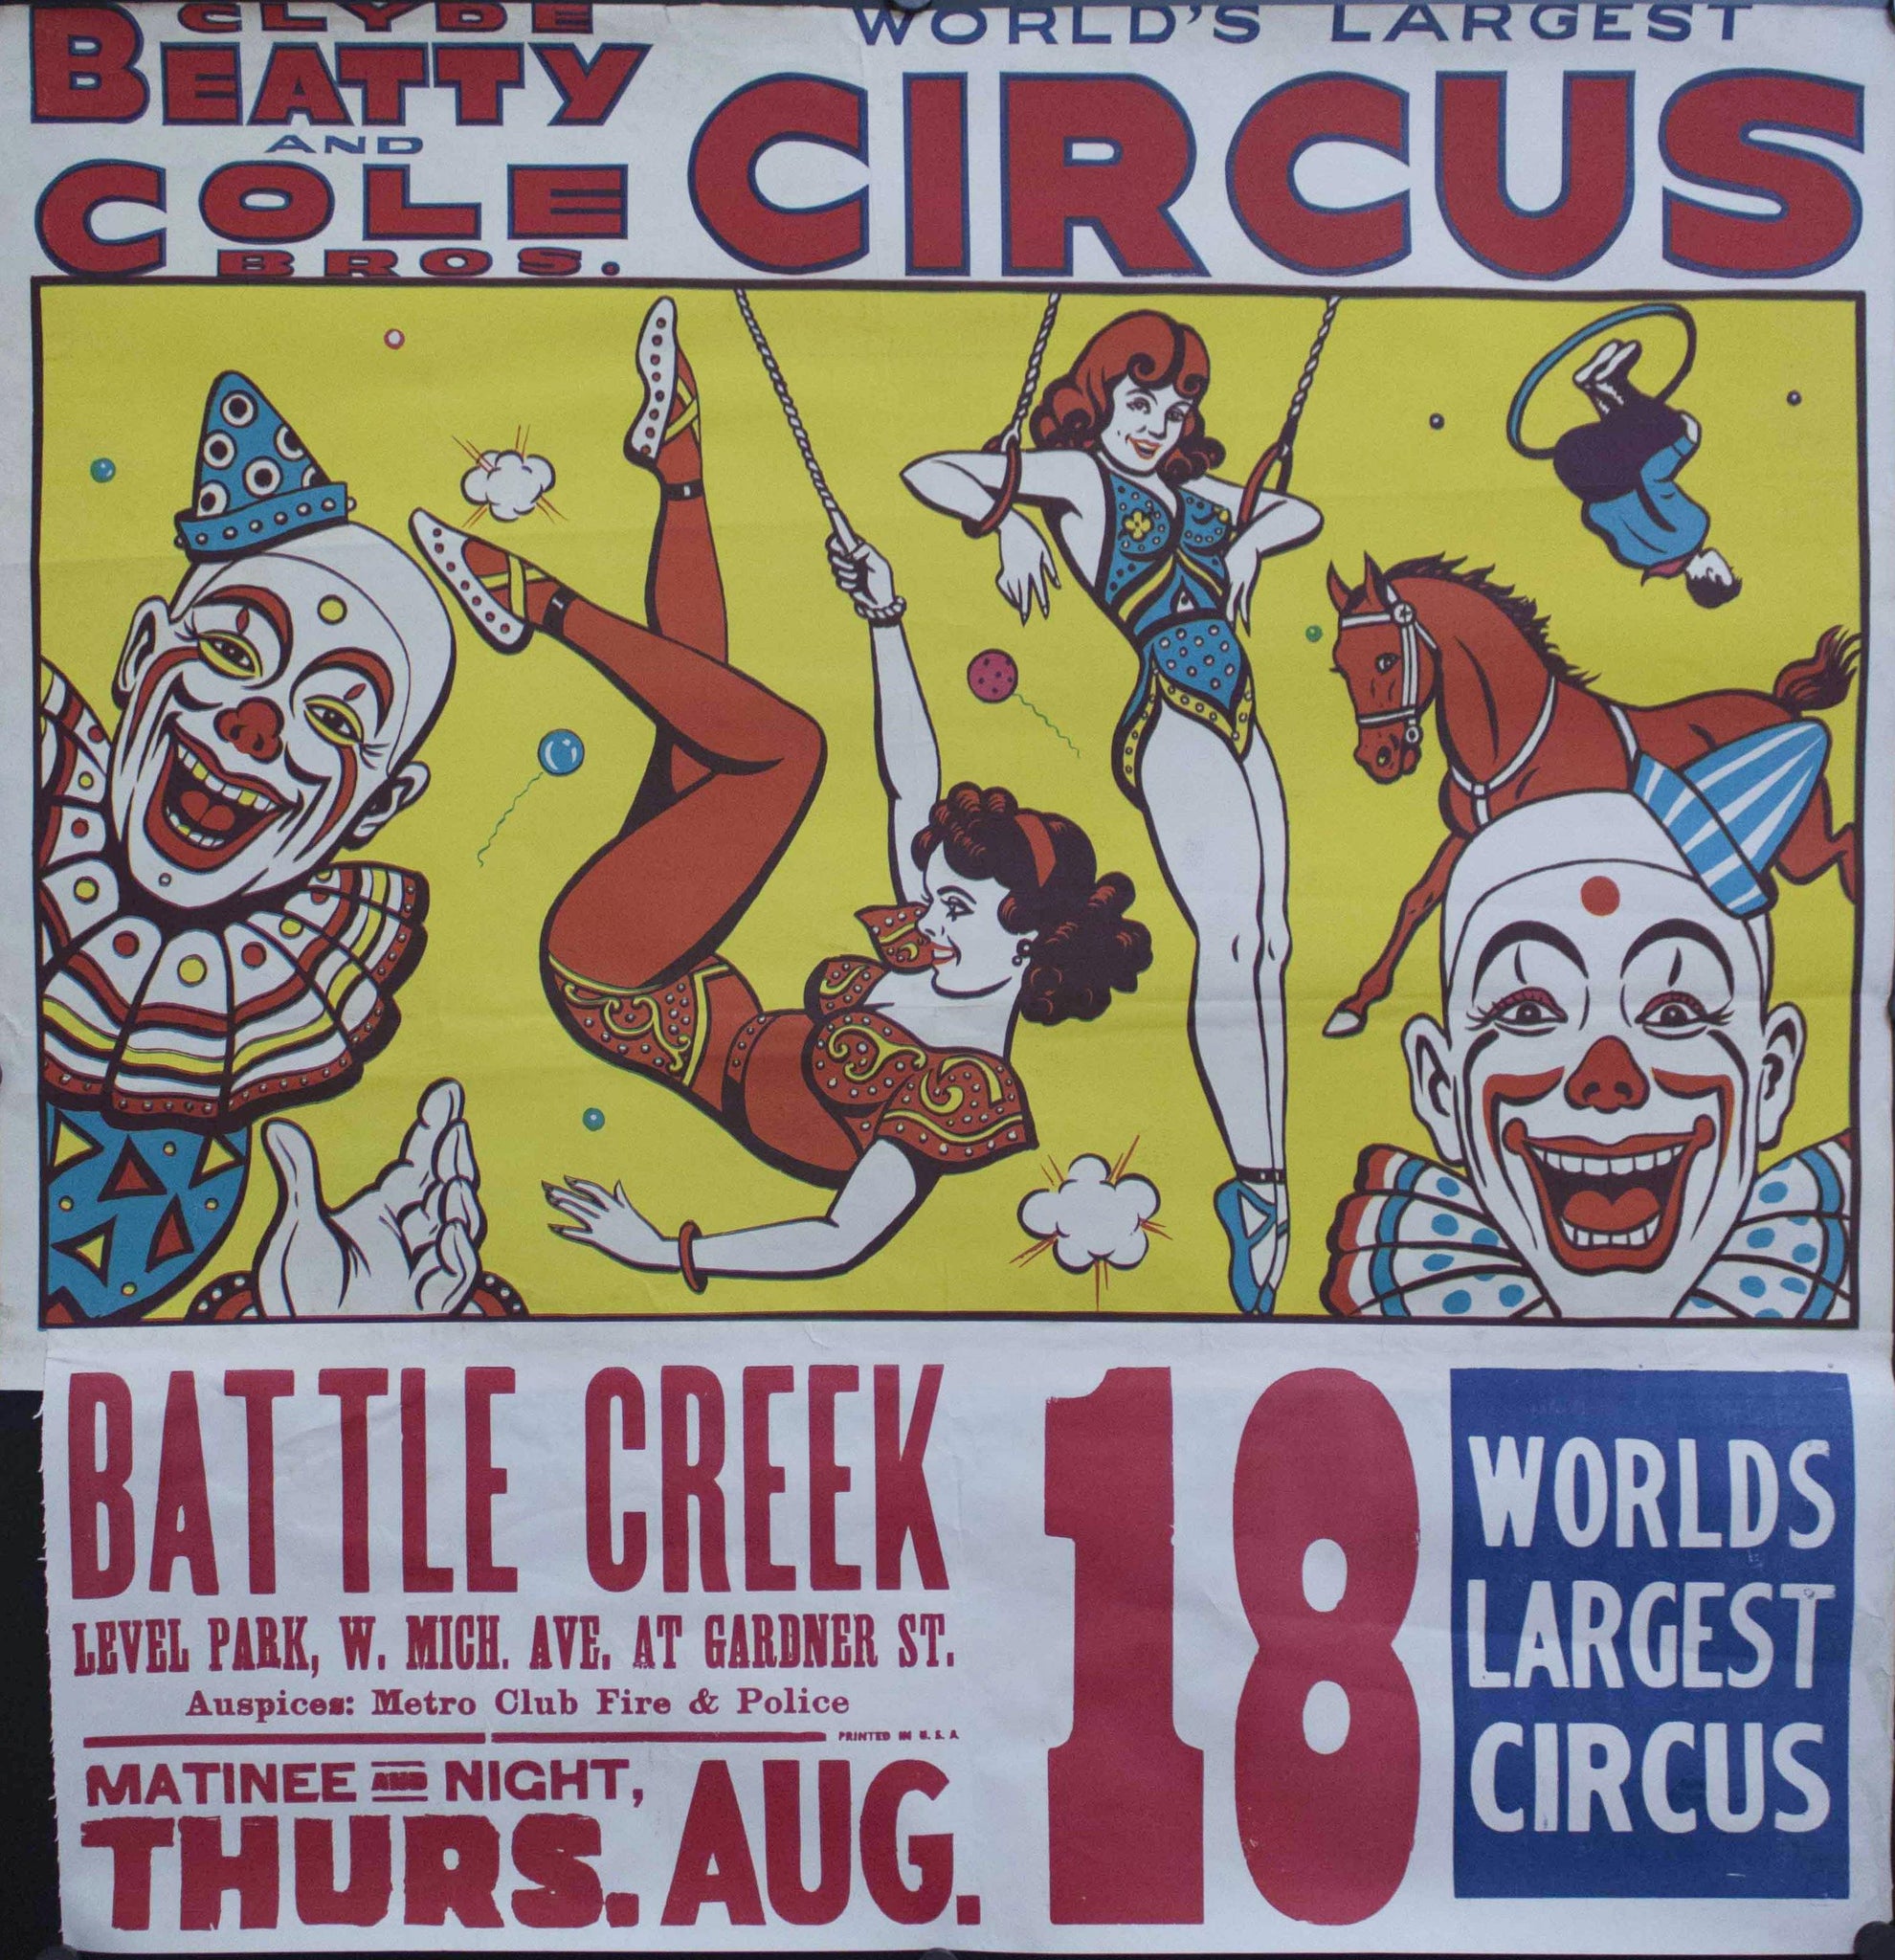 c. 1940 Clyde Beatty and Cole Bros Circus | World's Largest Circus | Battle Creek Level Park | Matinee Night - Golden Age Posters